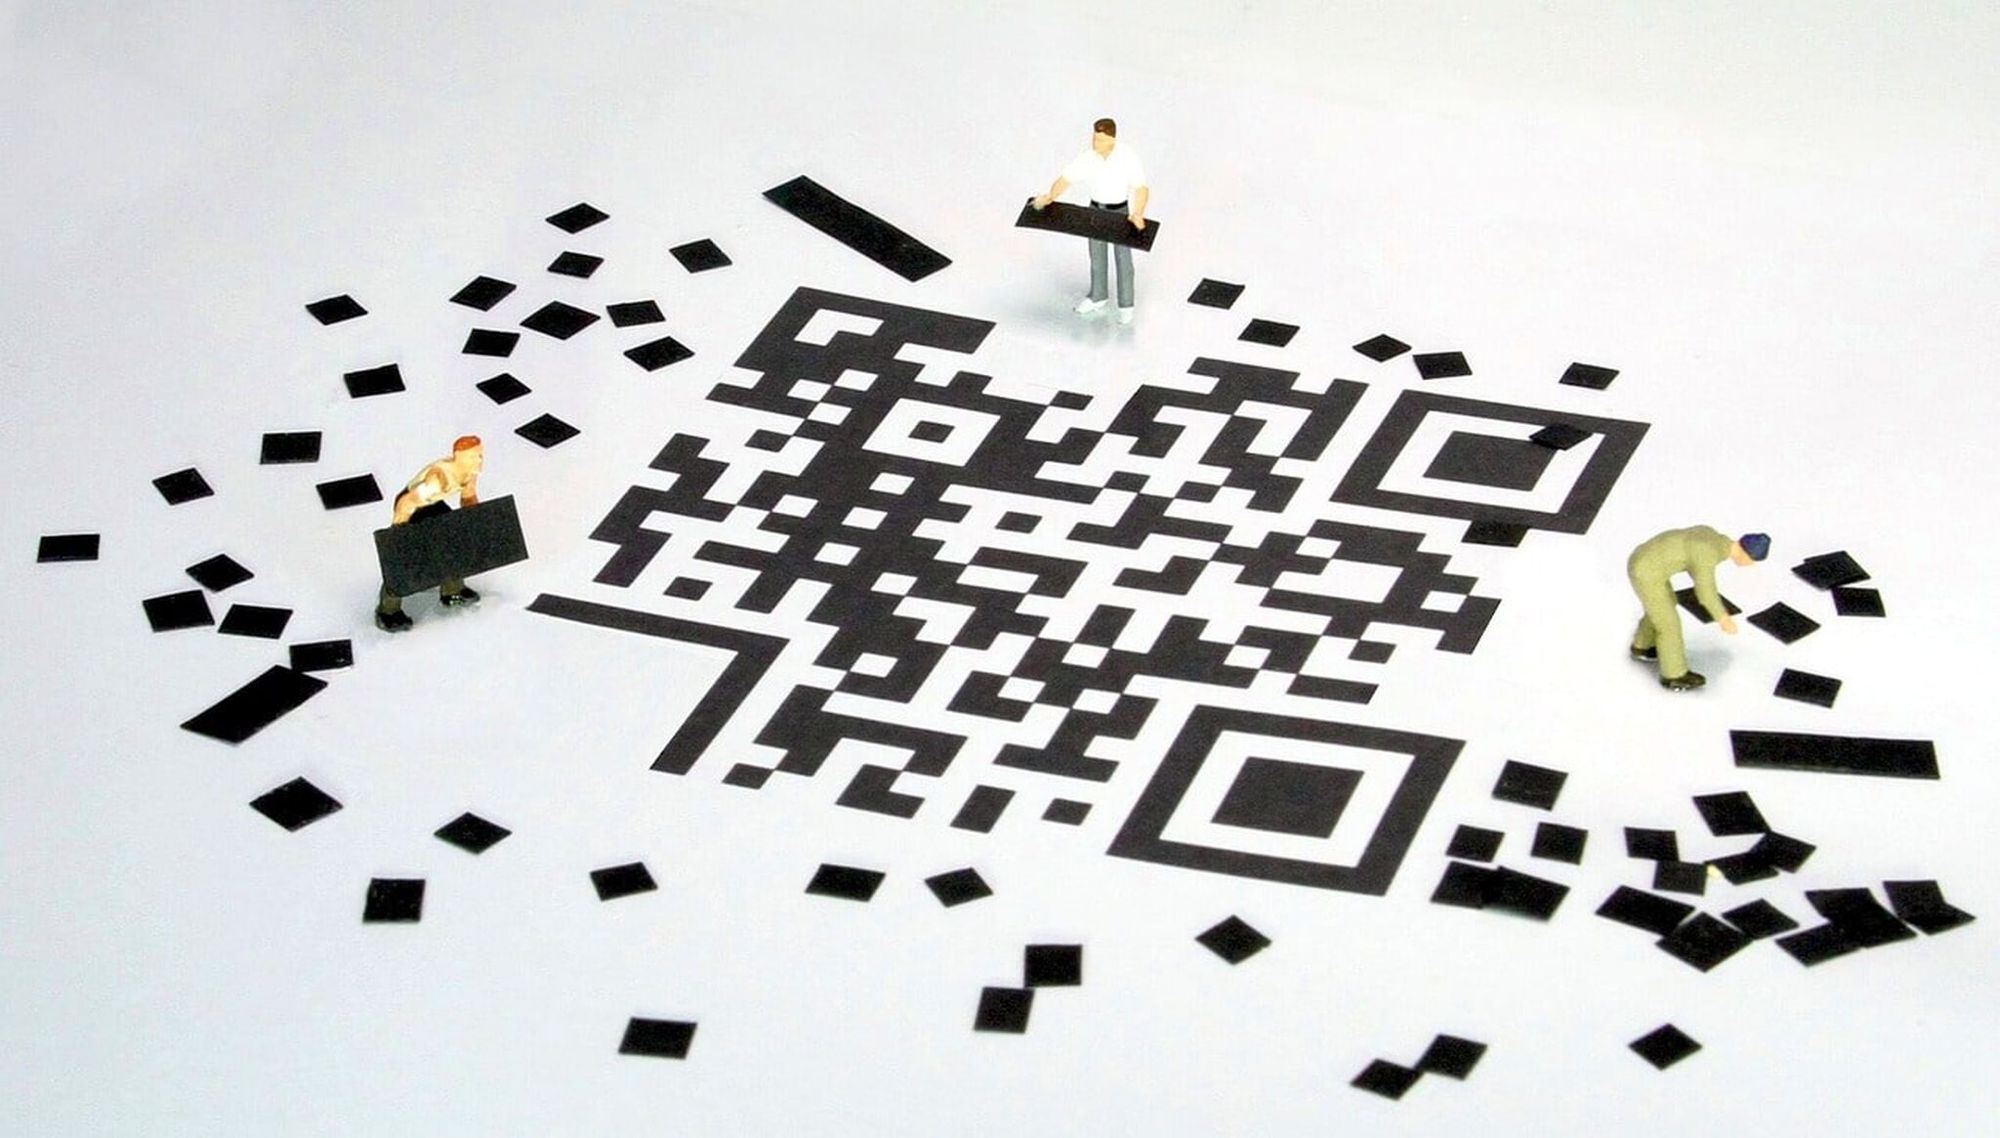 QR code with a miniature figures